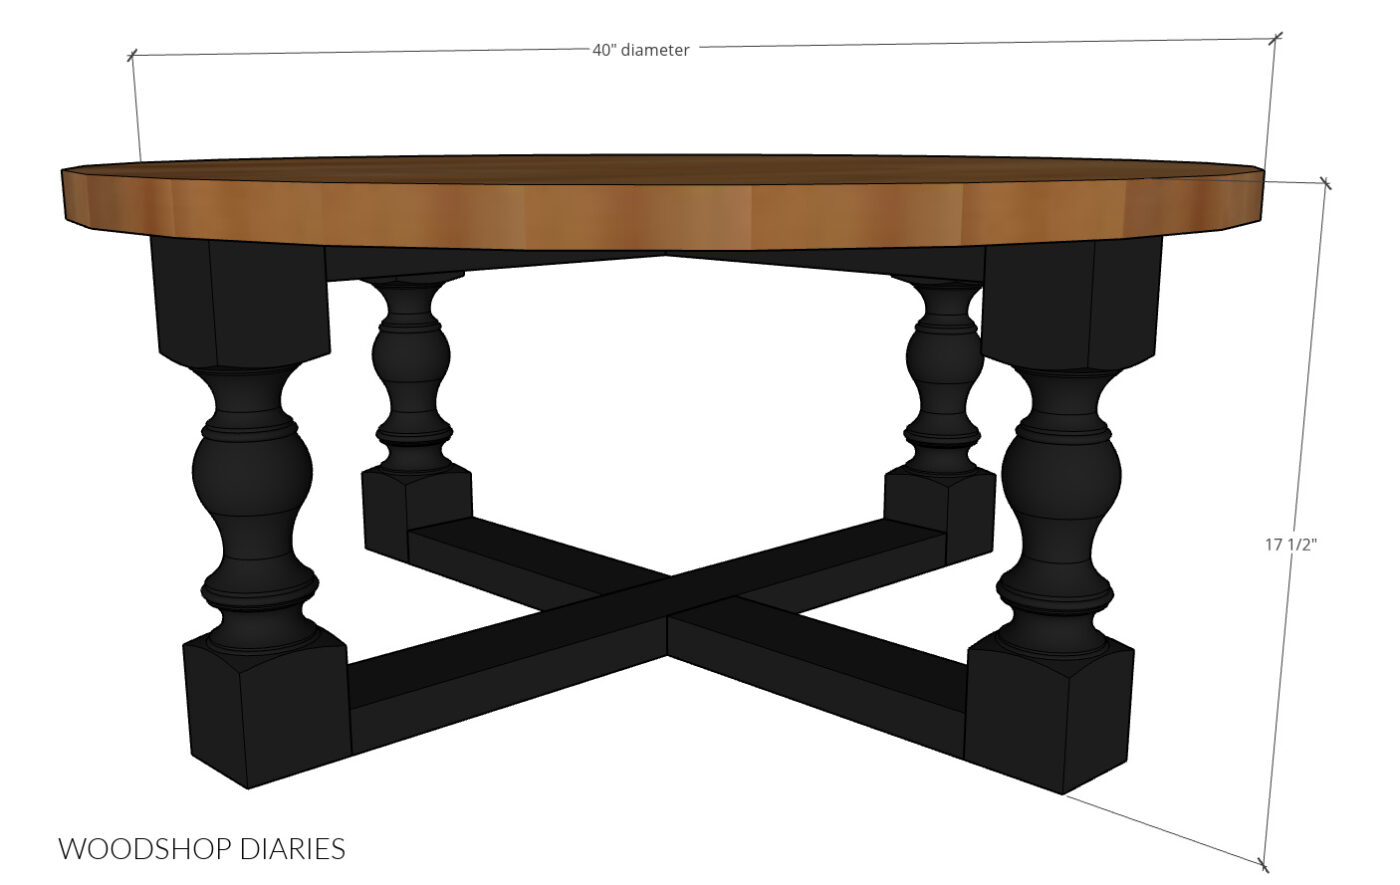 Overall dimensional diagram of coffee table with decorative legs